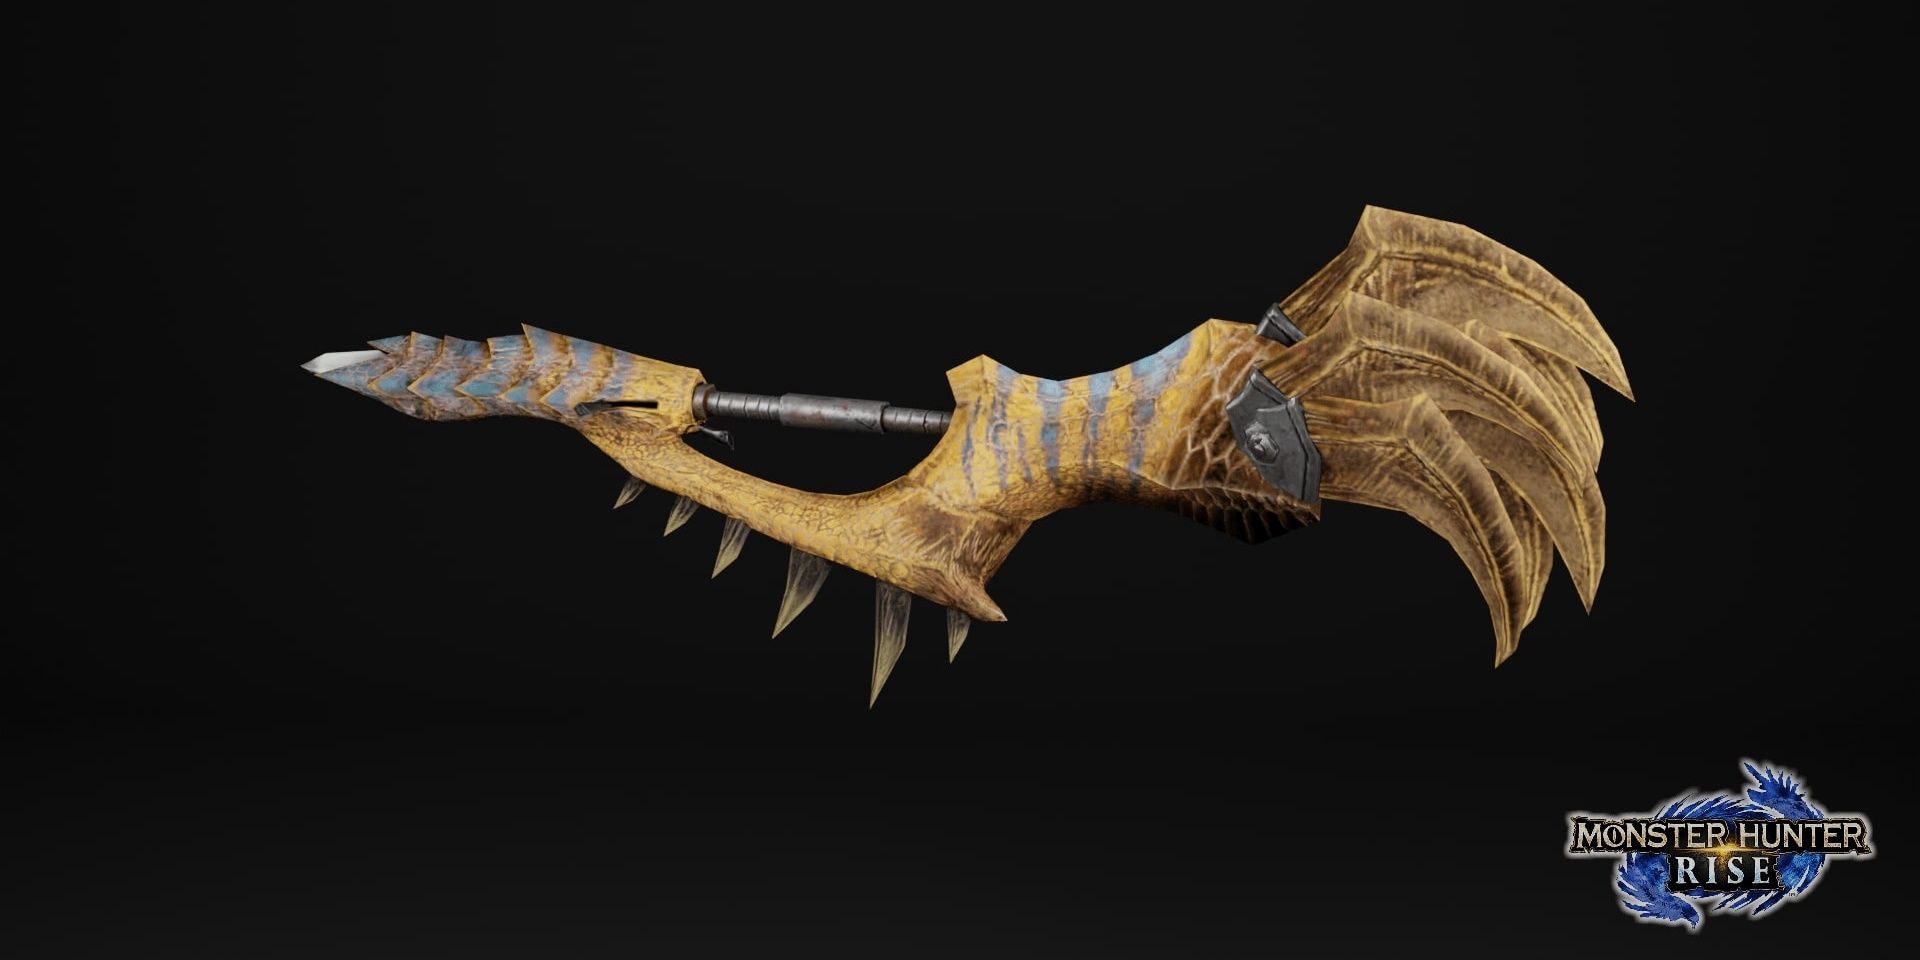 Tigerclaw Glaive on a black background